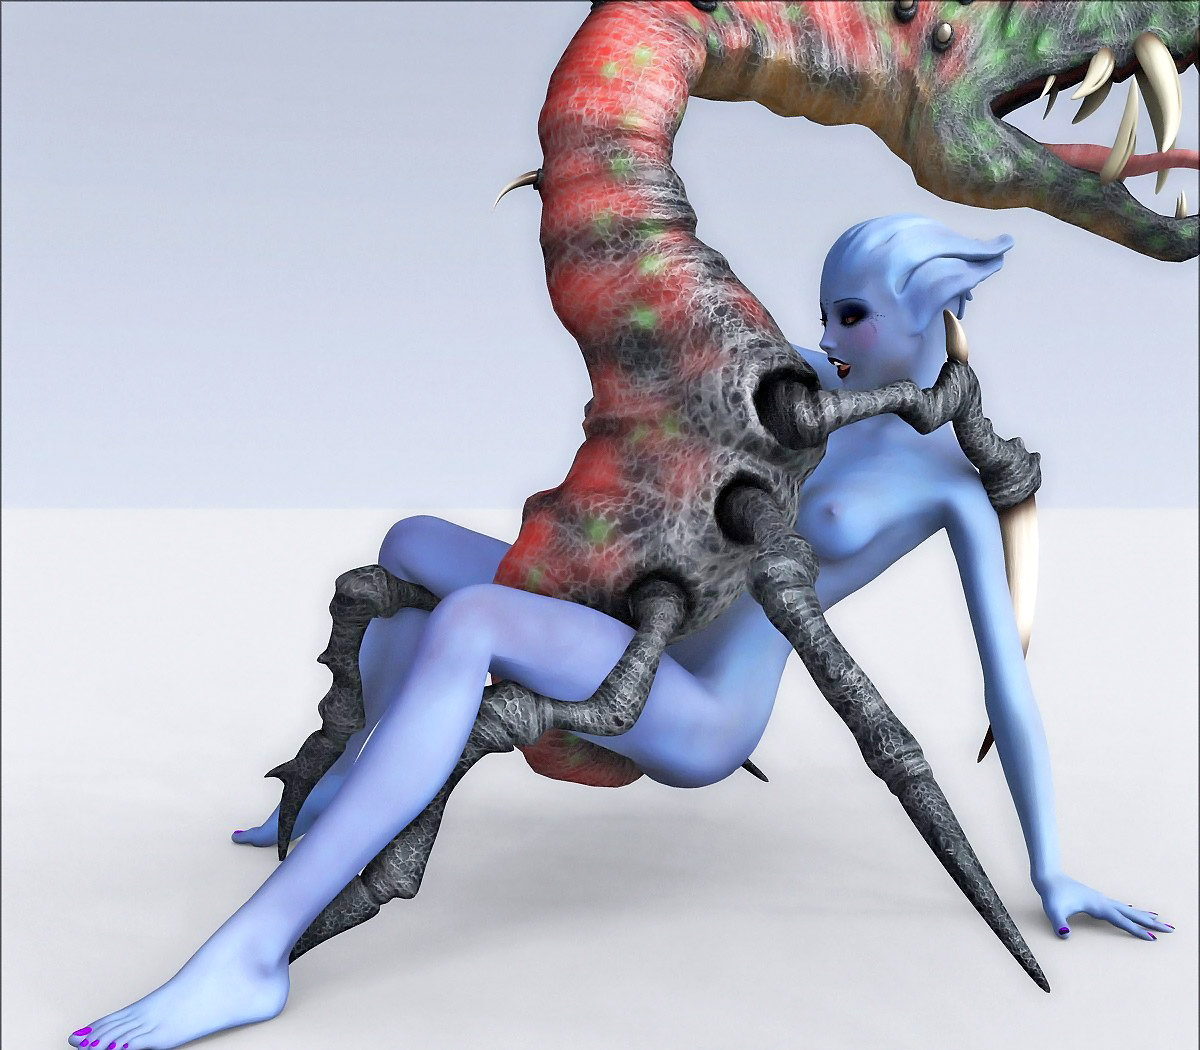 3d Insect - chick takes on big insect during 3d cartoon monster sex | 3dwerewolfporn.com